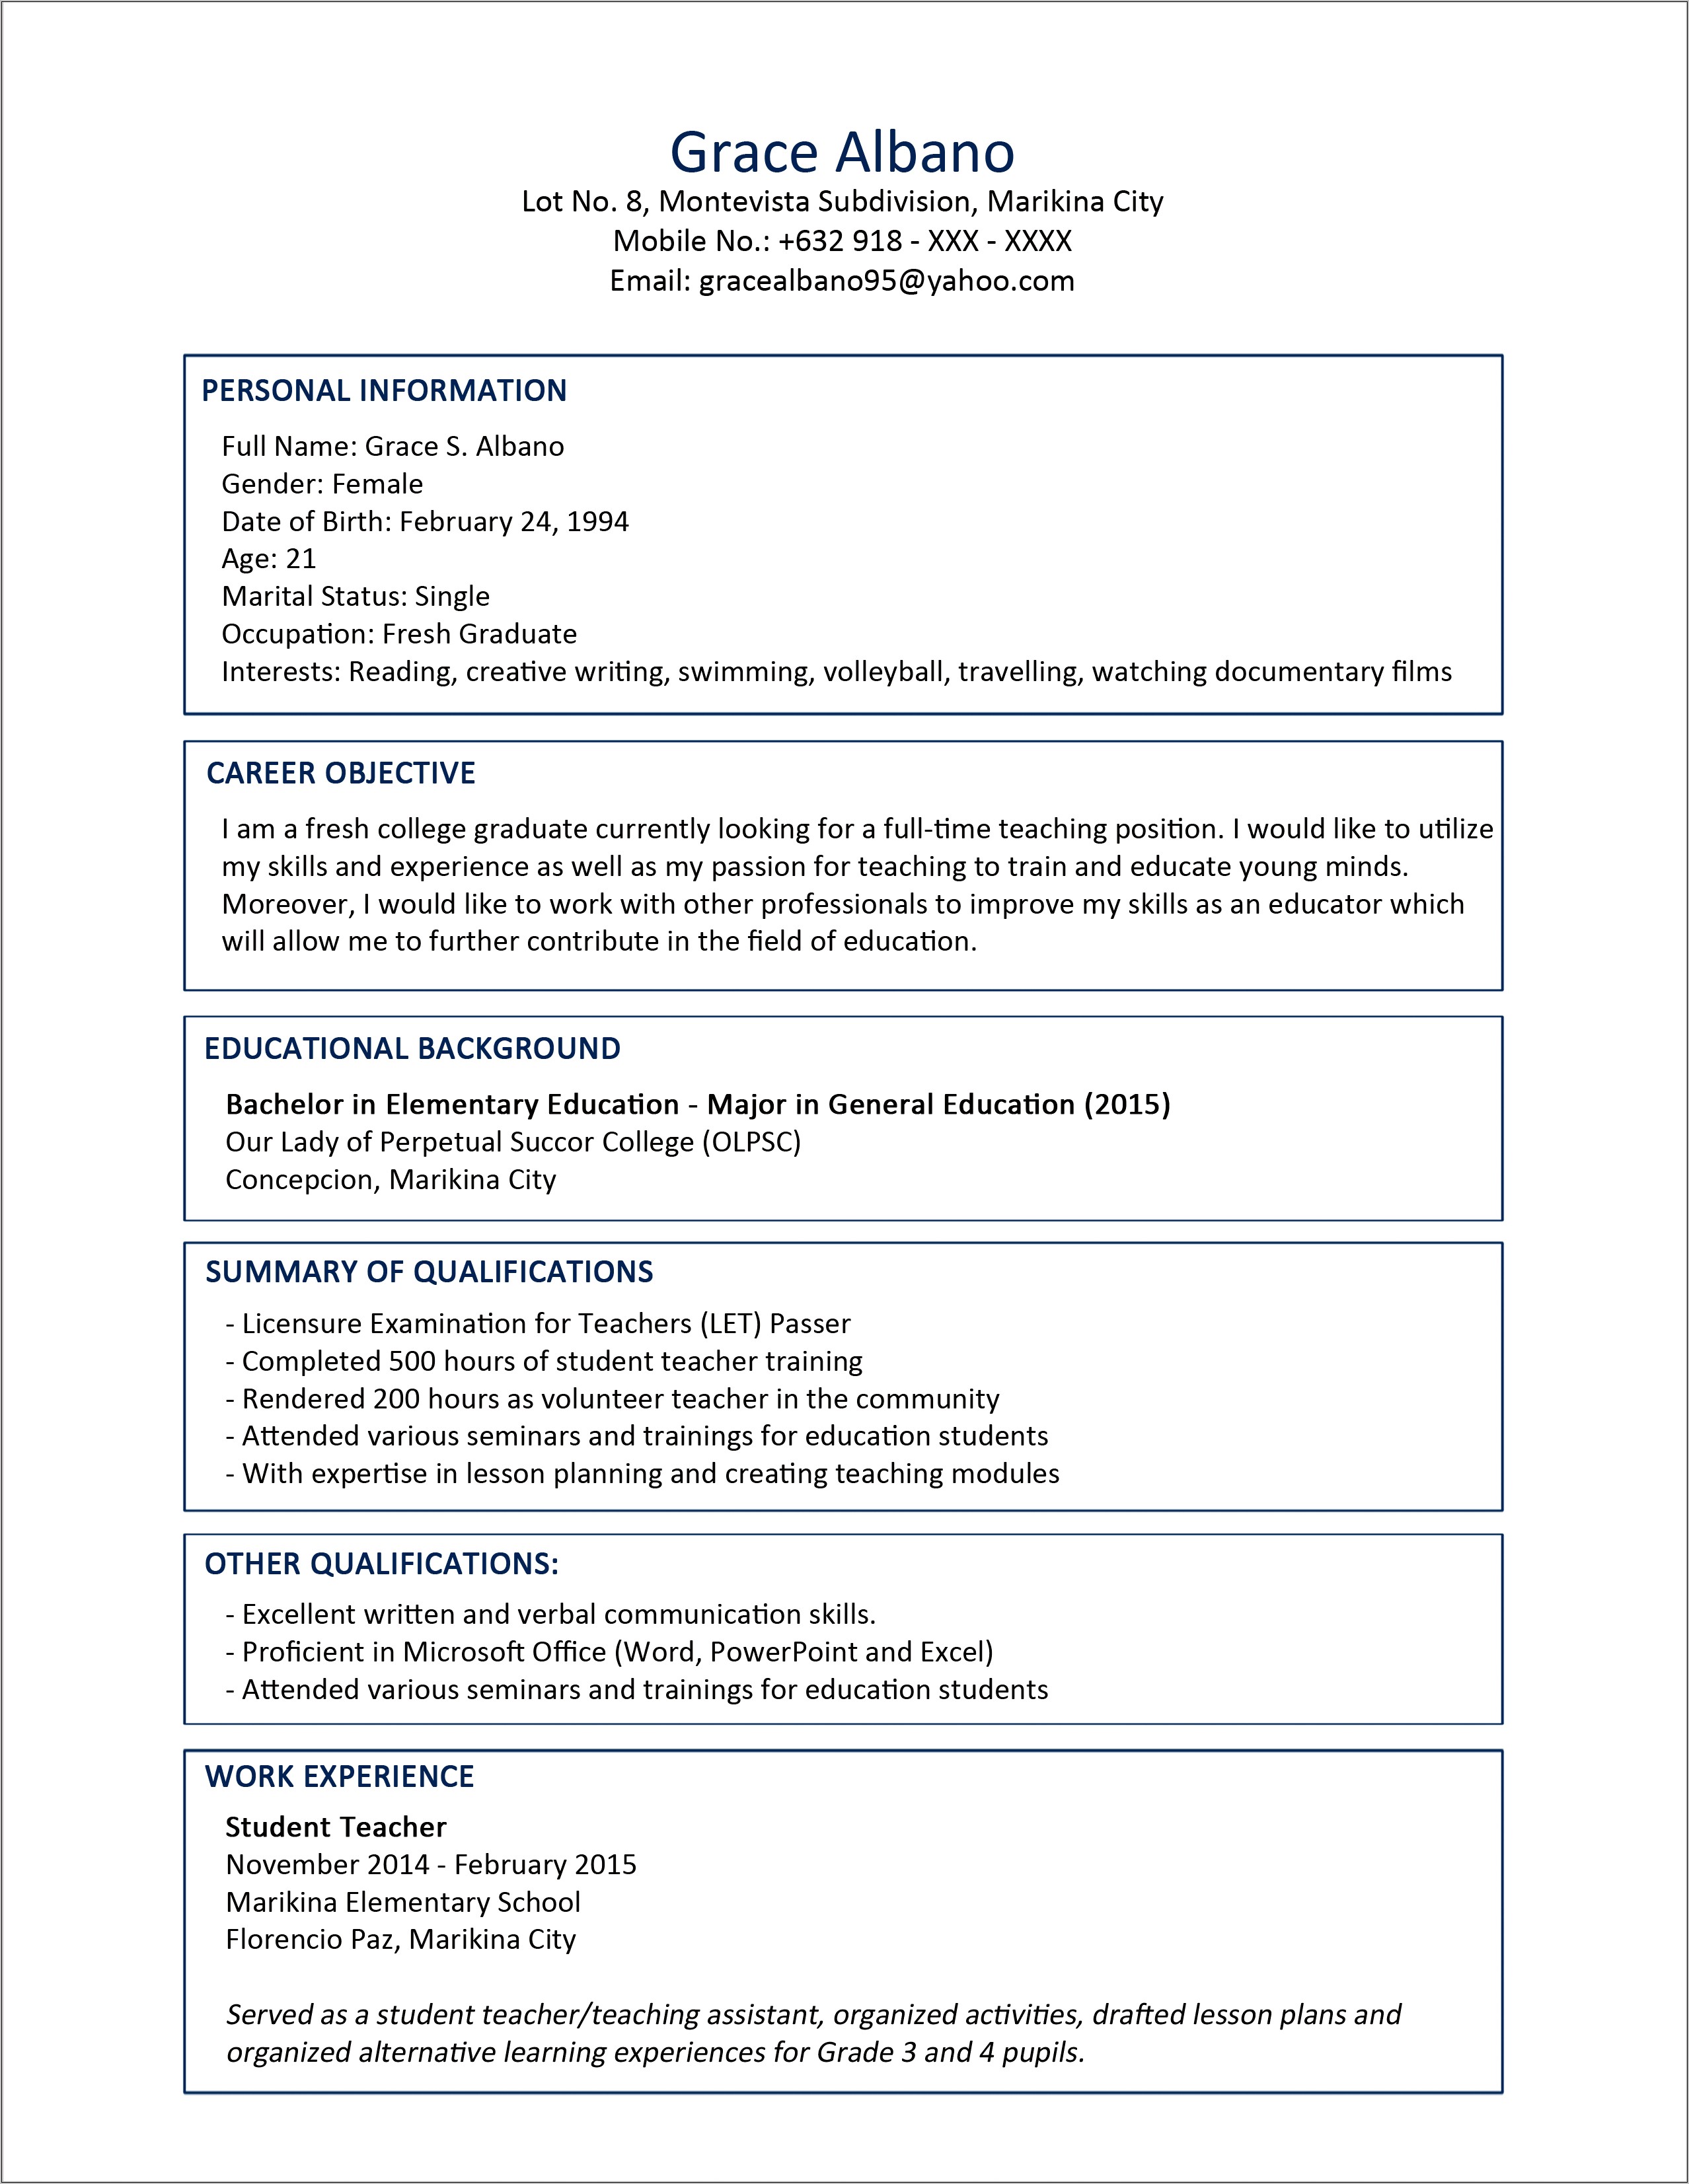 Resume Objective Ideas For Masters In Business Administration